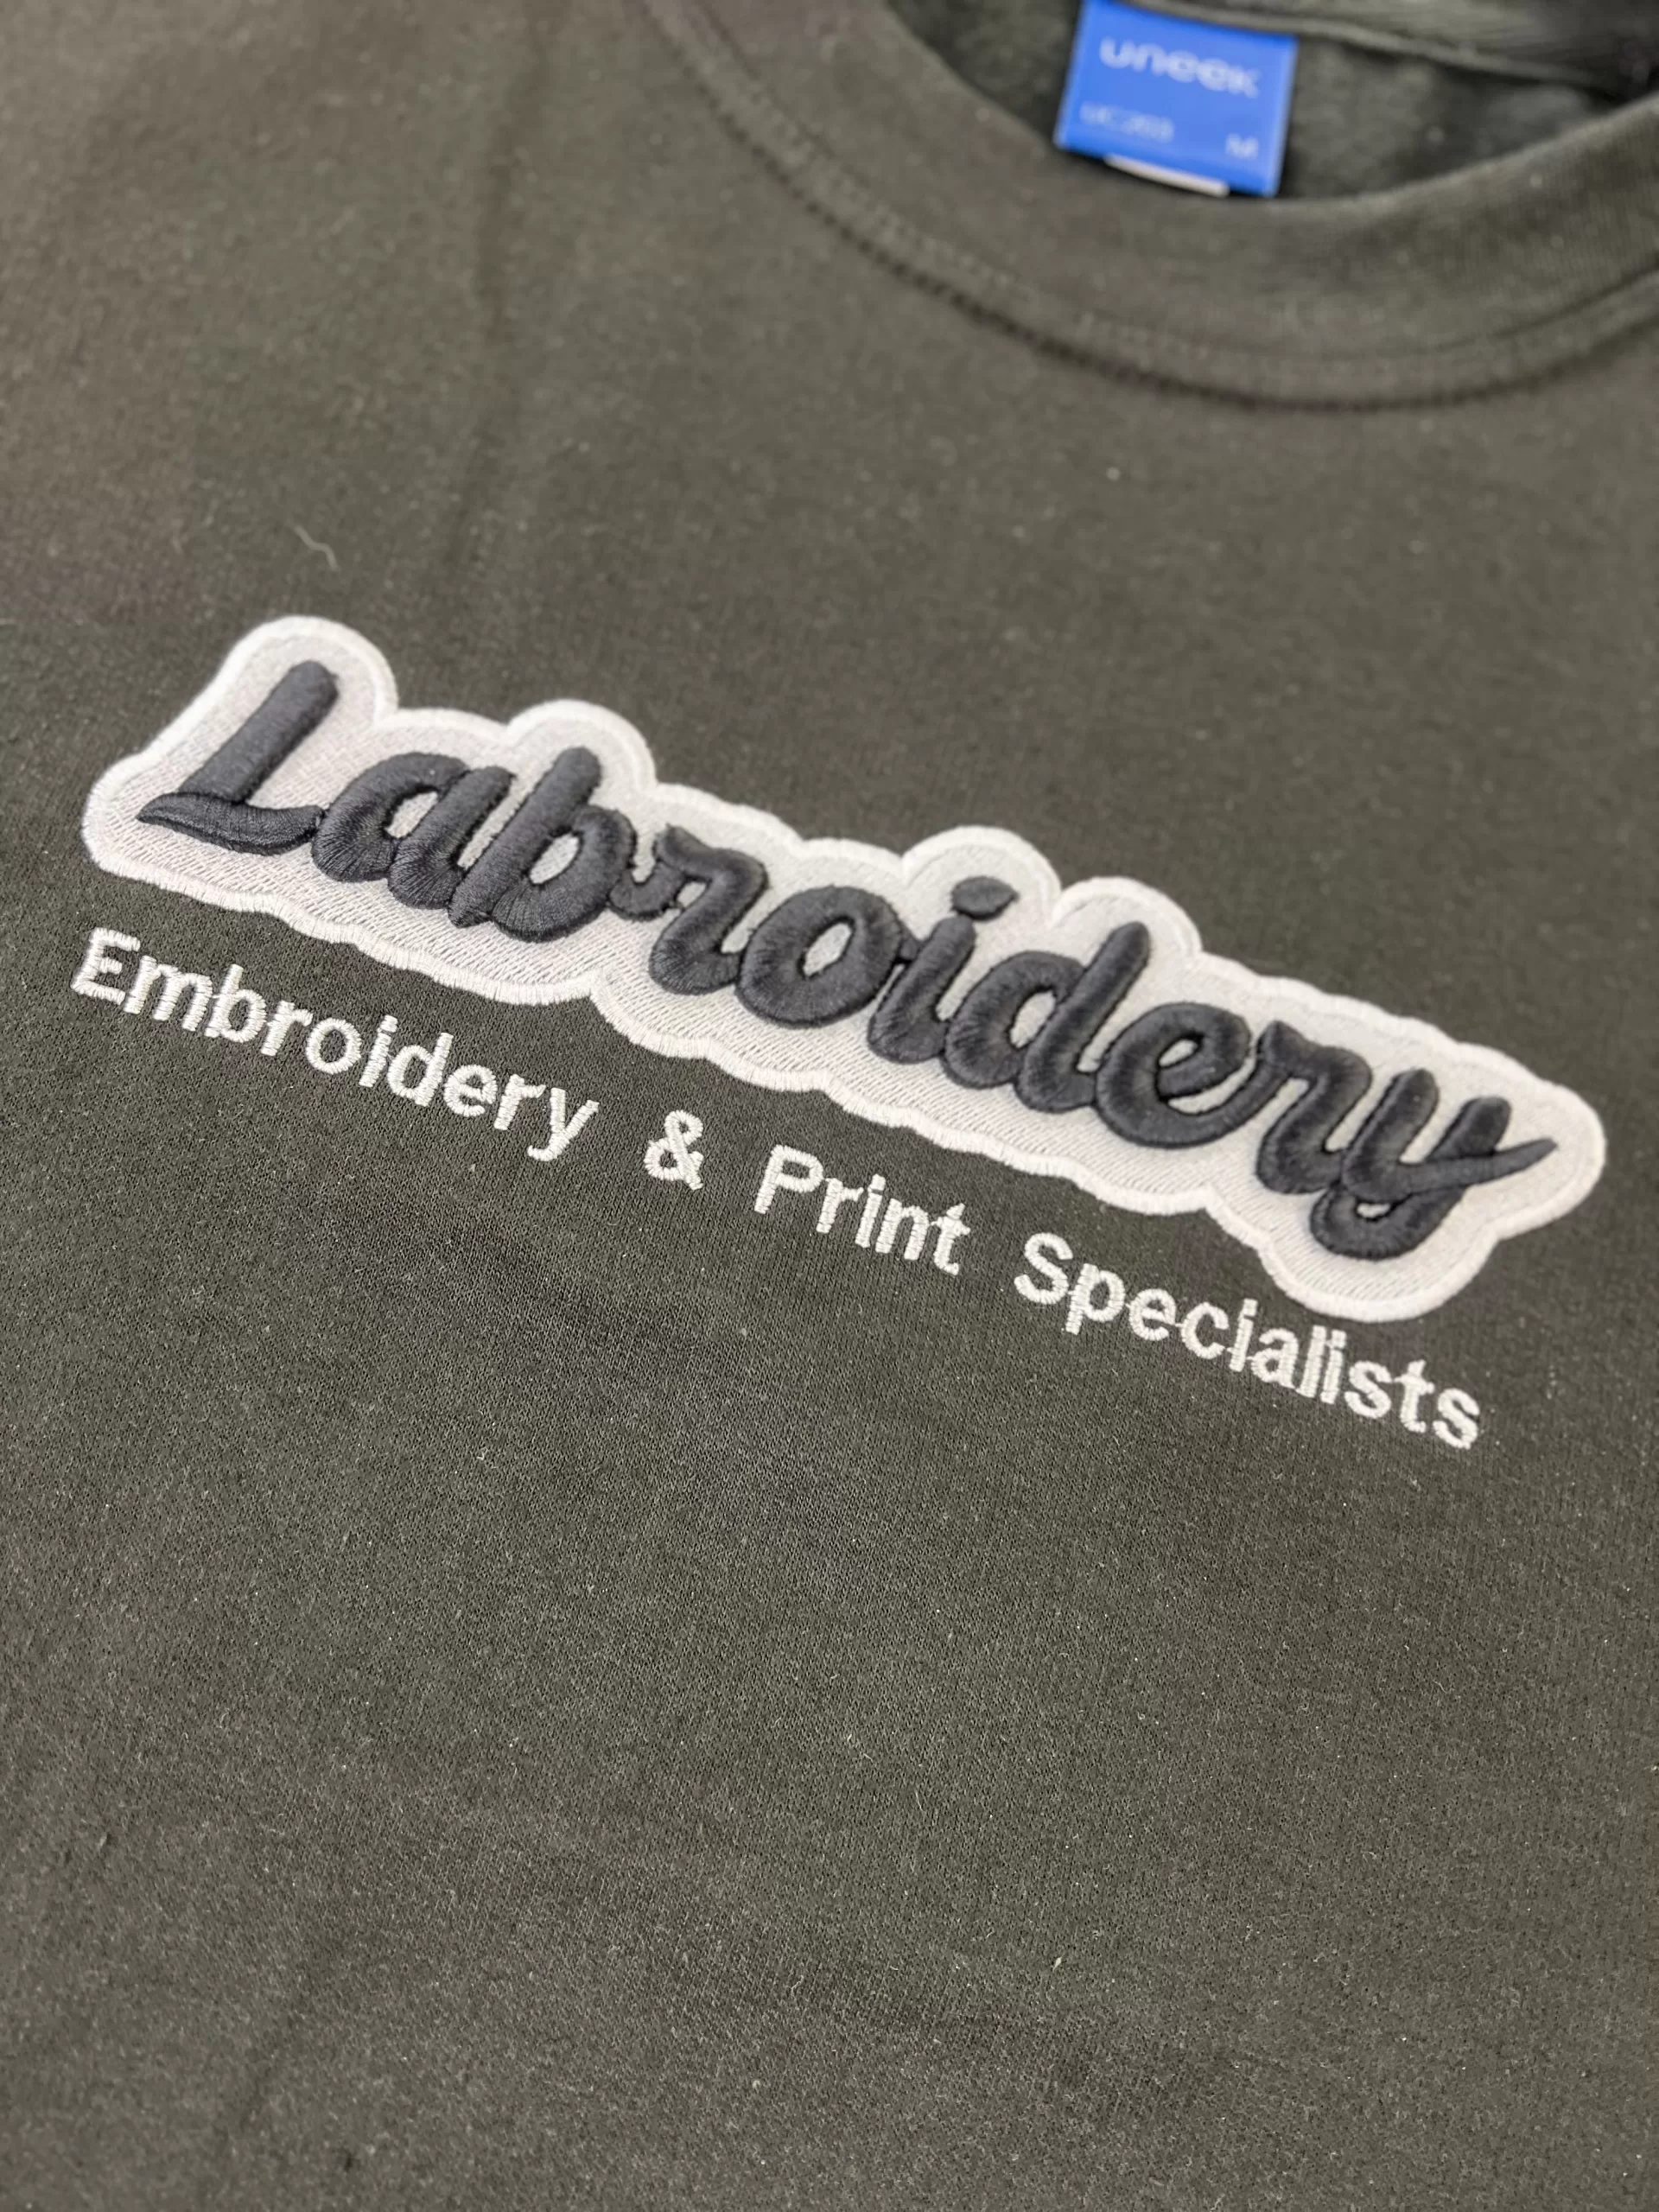 Labroidery